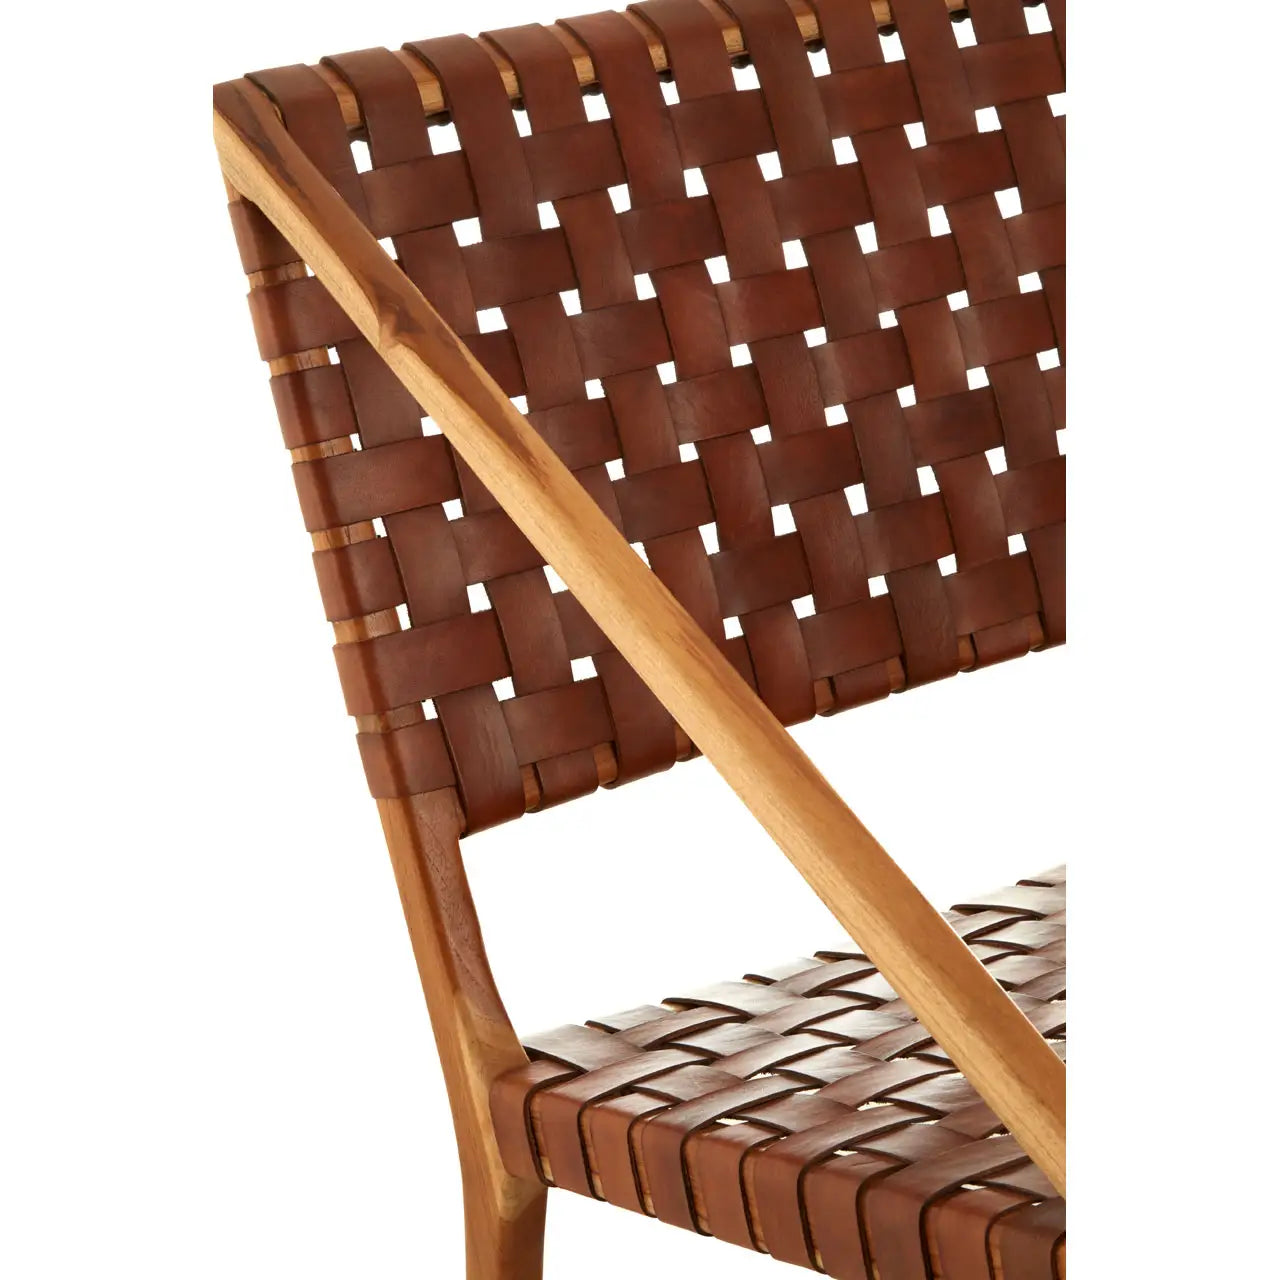 Kendari Tan Strapped Leather and Teak Chair - Living In Kin